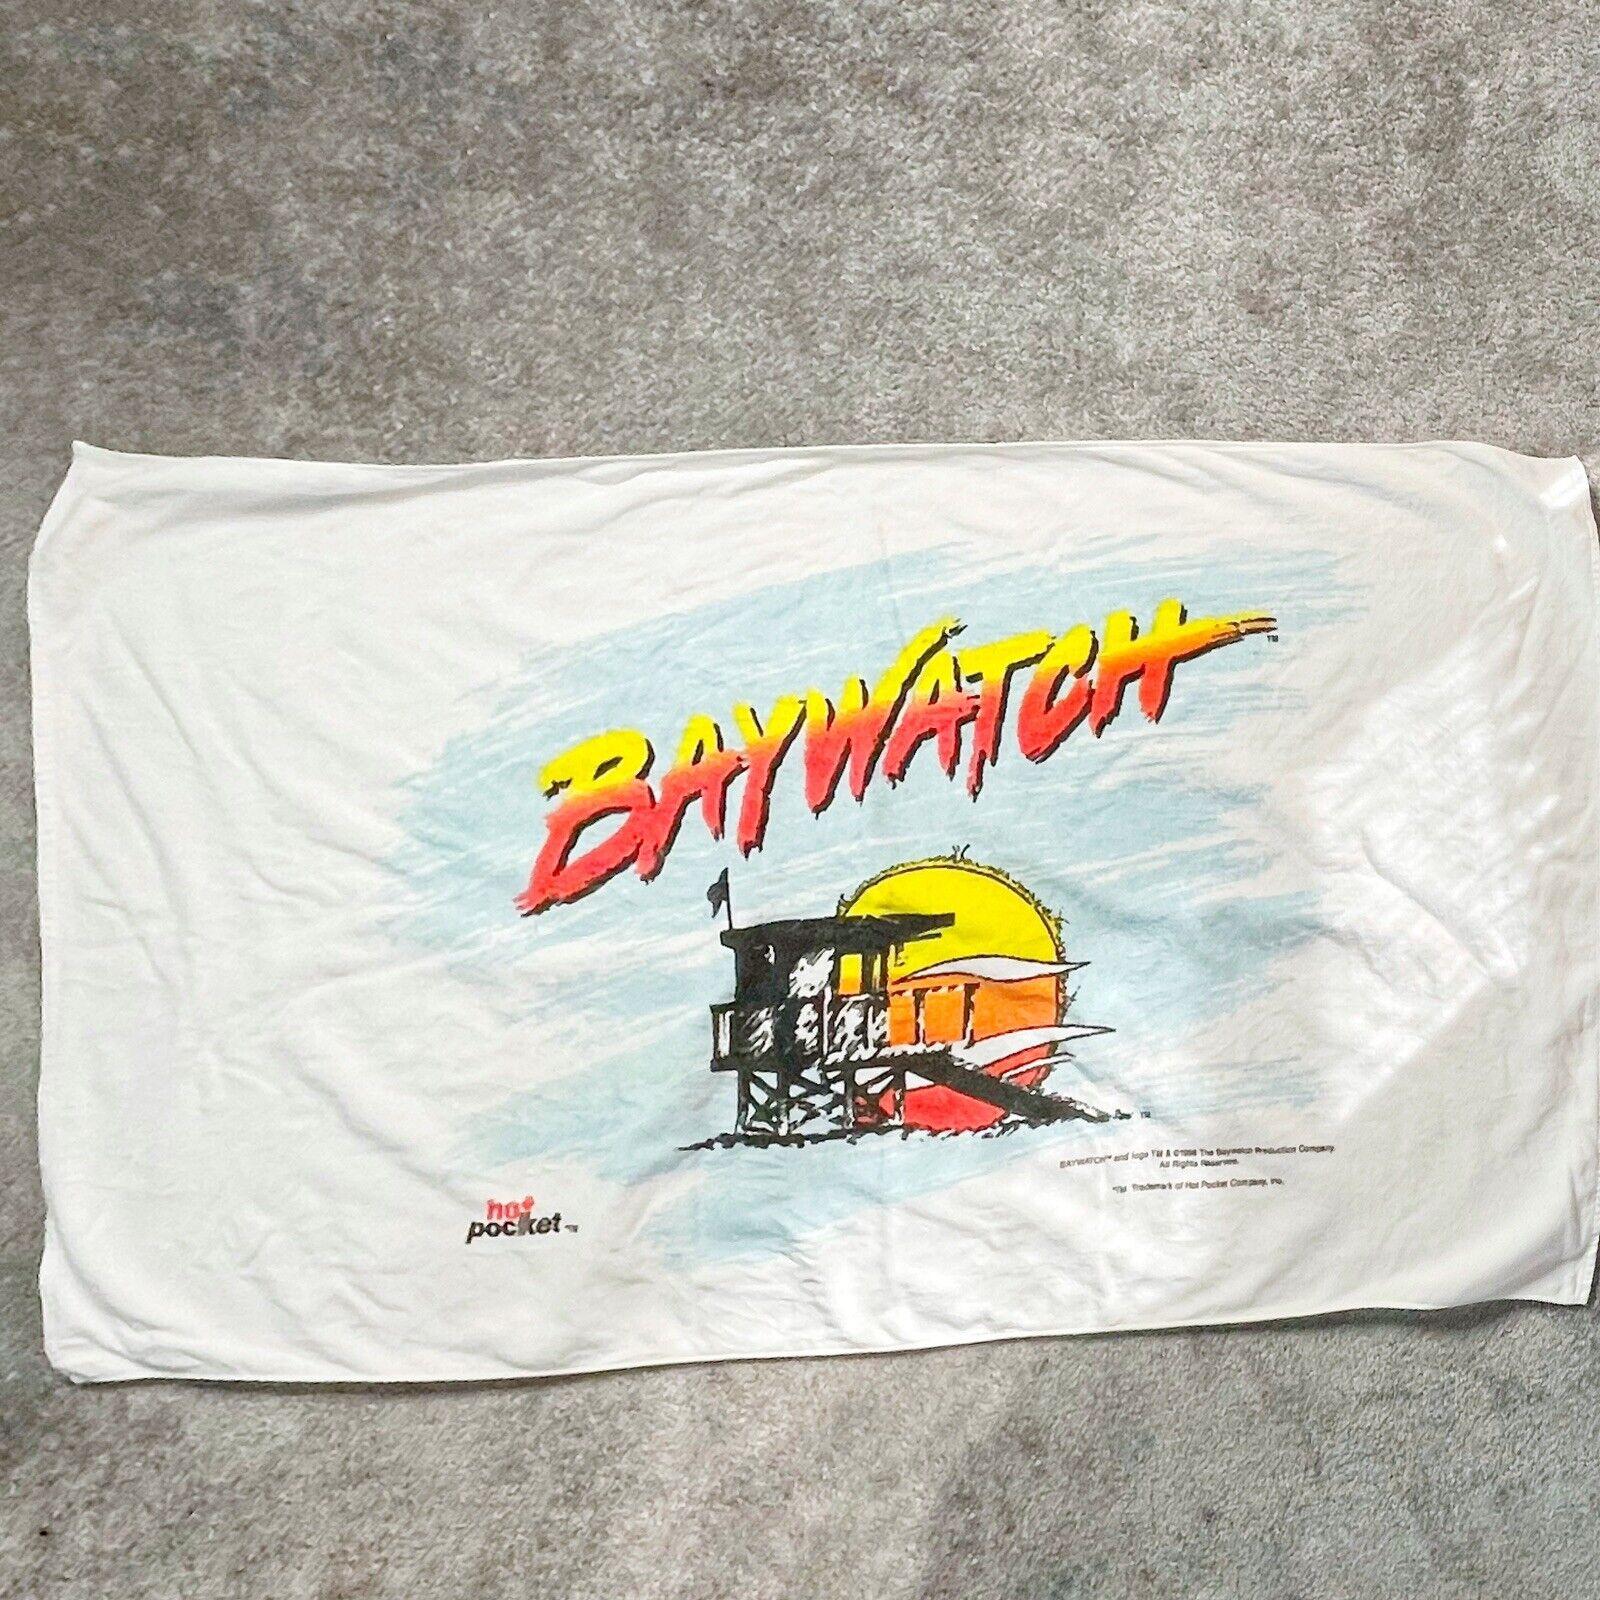 Rare Baywatch 1996 Vintage Beach Towel Hot Pockets Large Rare Collectible 58x32